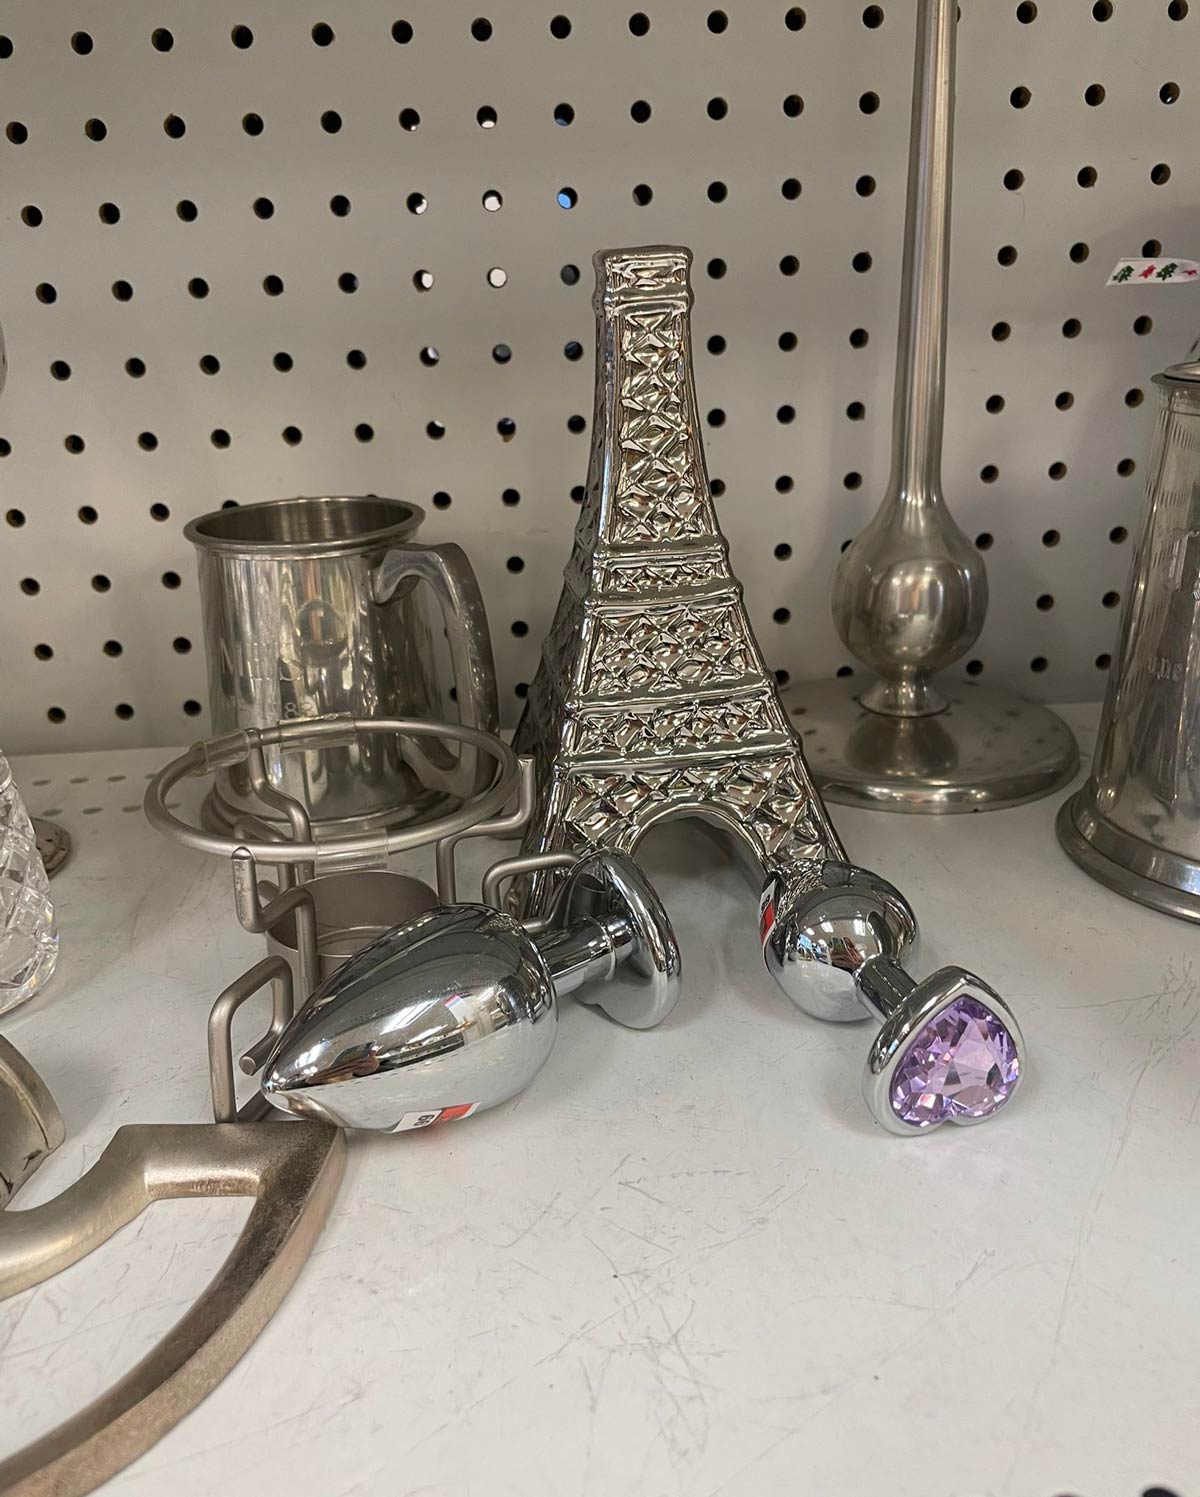 Found at a nearby thrift shop in the knick knack section. I don't think they know